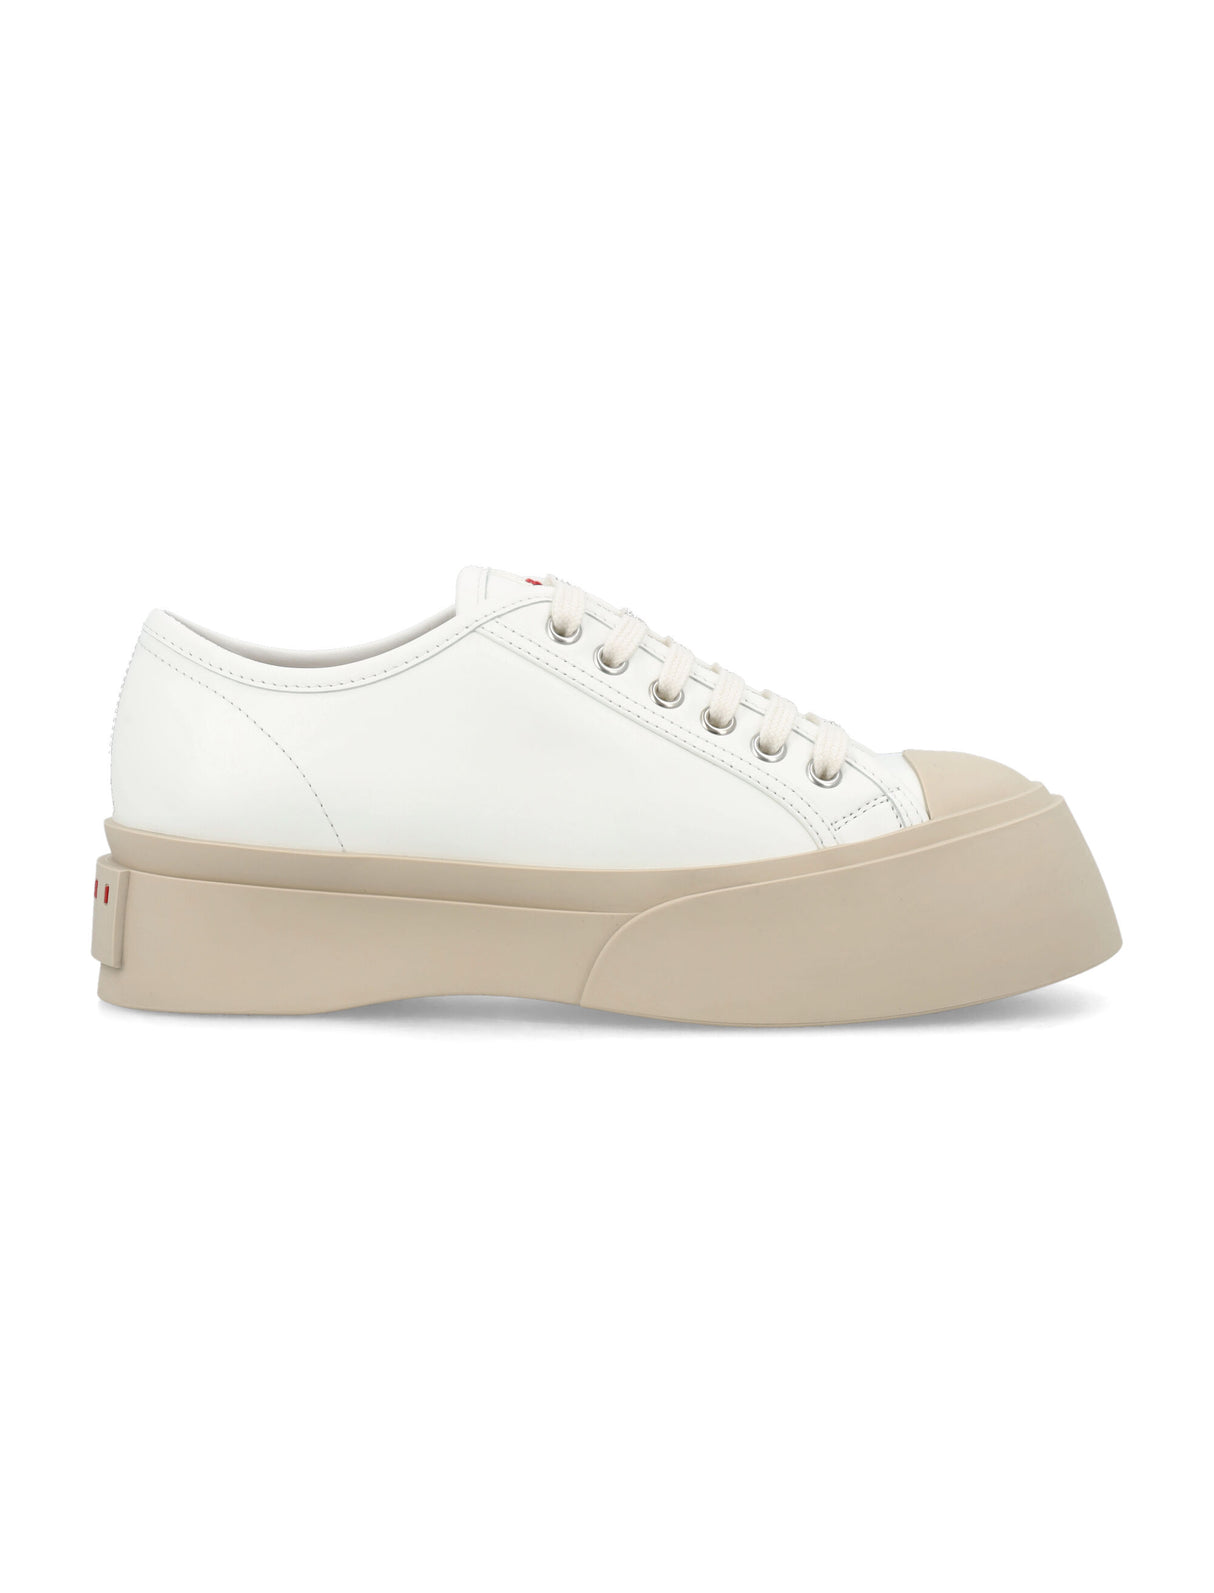 Lily White Leather Lace-Up Sneakers for Women